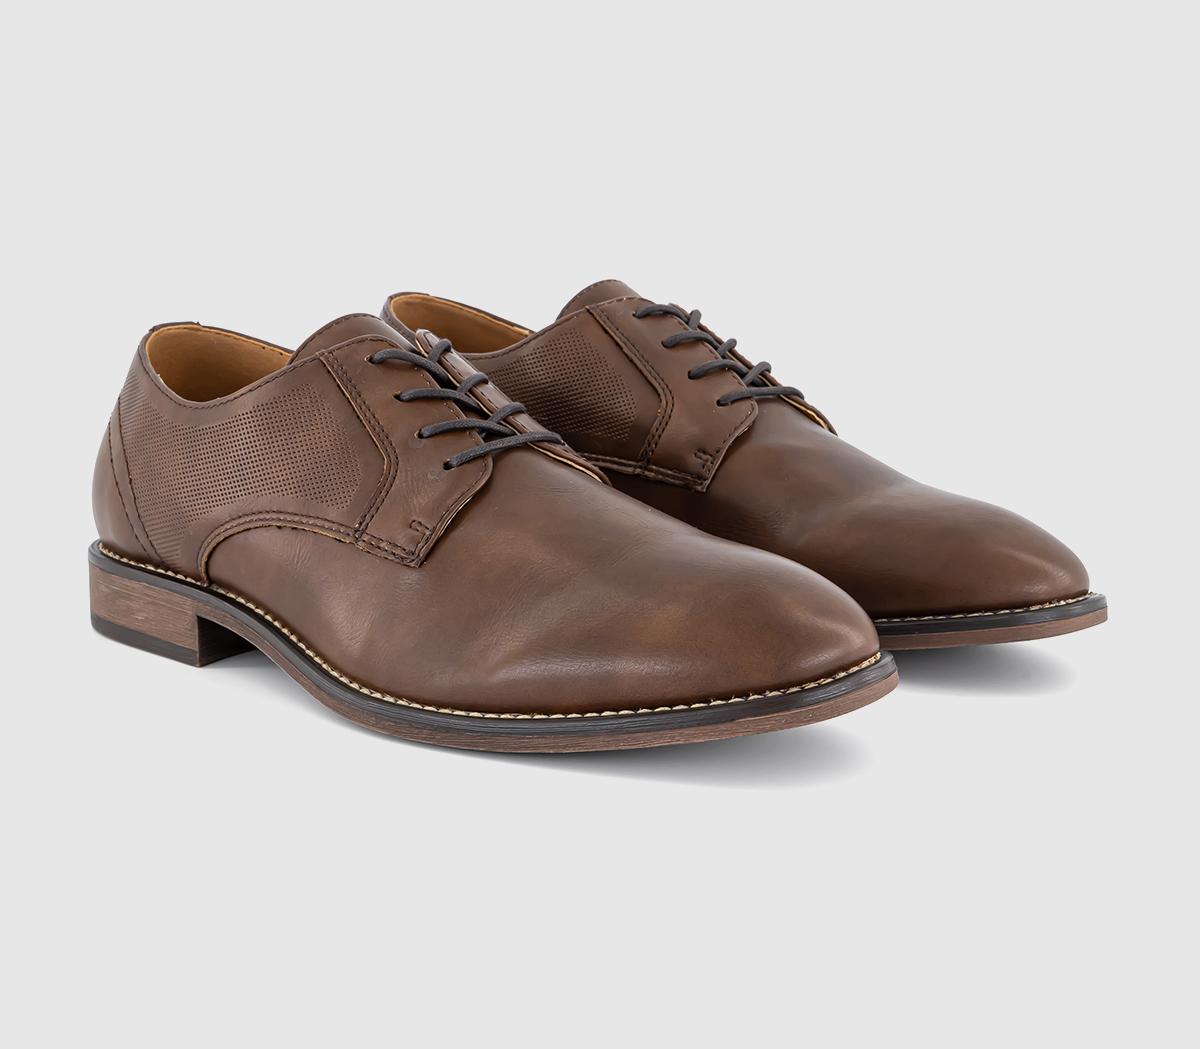 OFFICE Mens Claydon Smart Derby Shoes Brown, 8